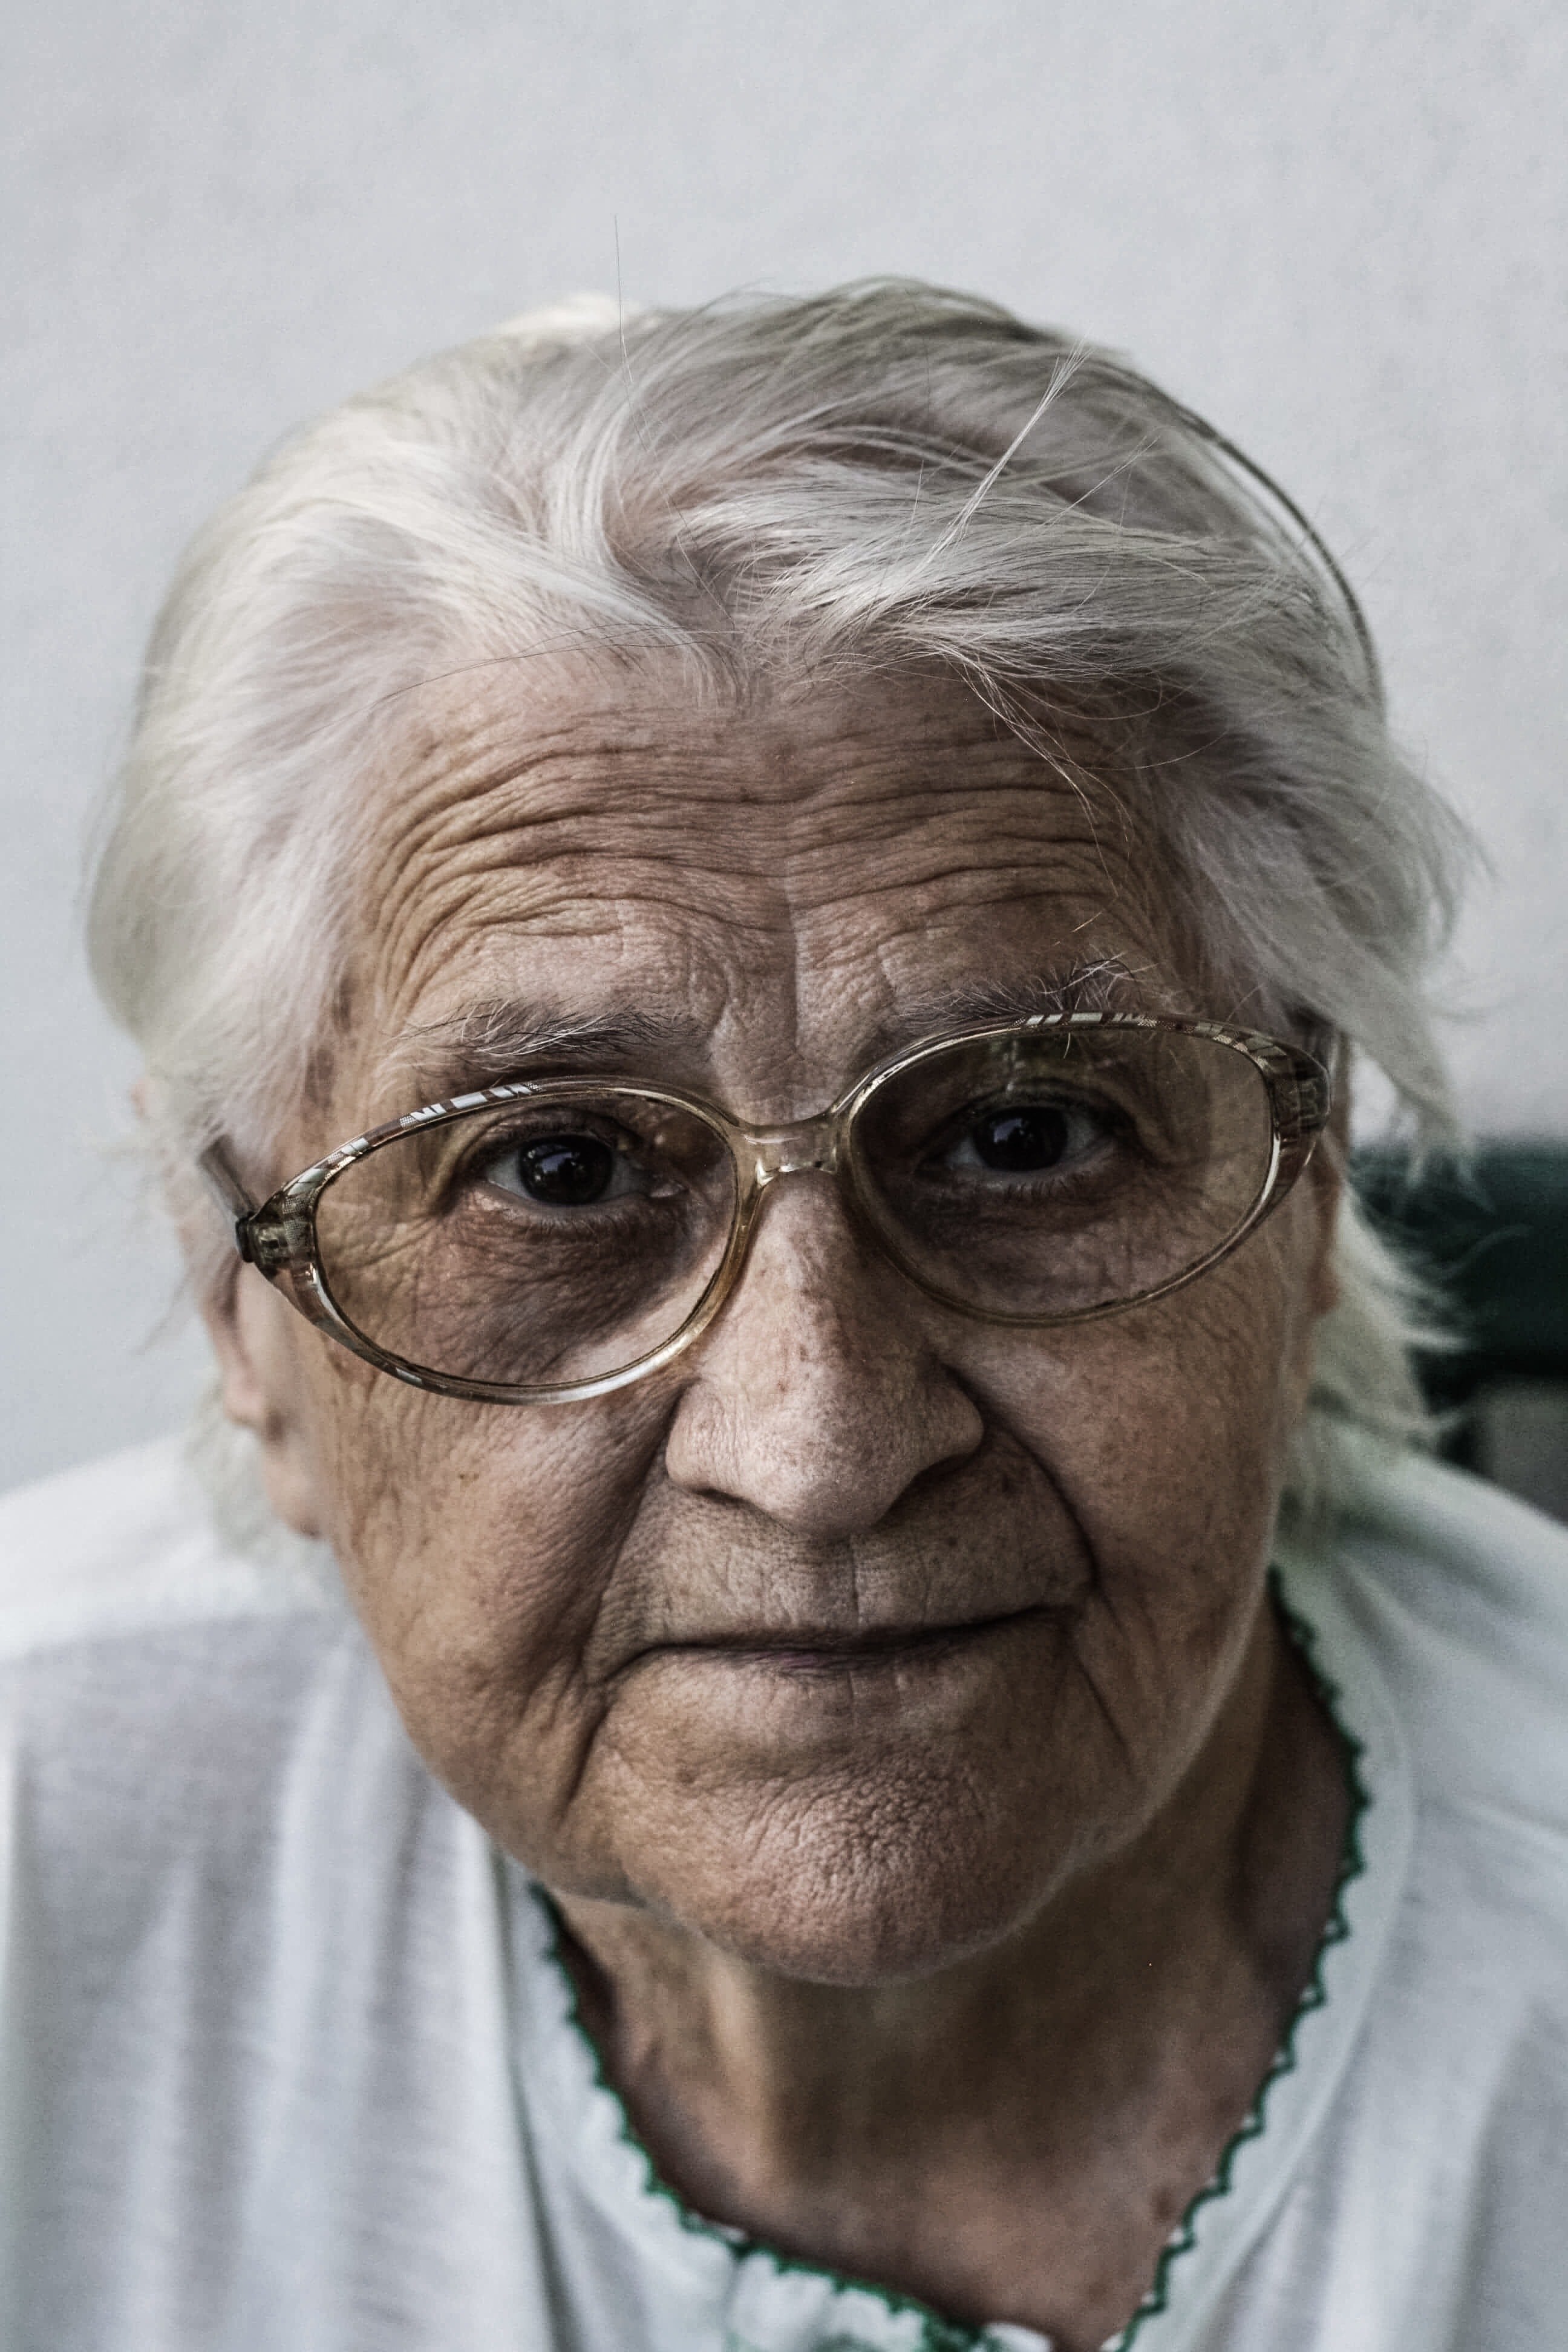 Deidre was forced to move to a nursing home when she broke her hip. | Source: Unsplash